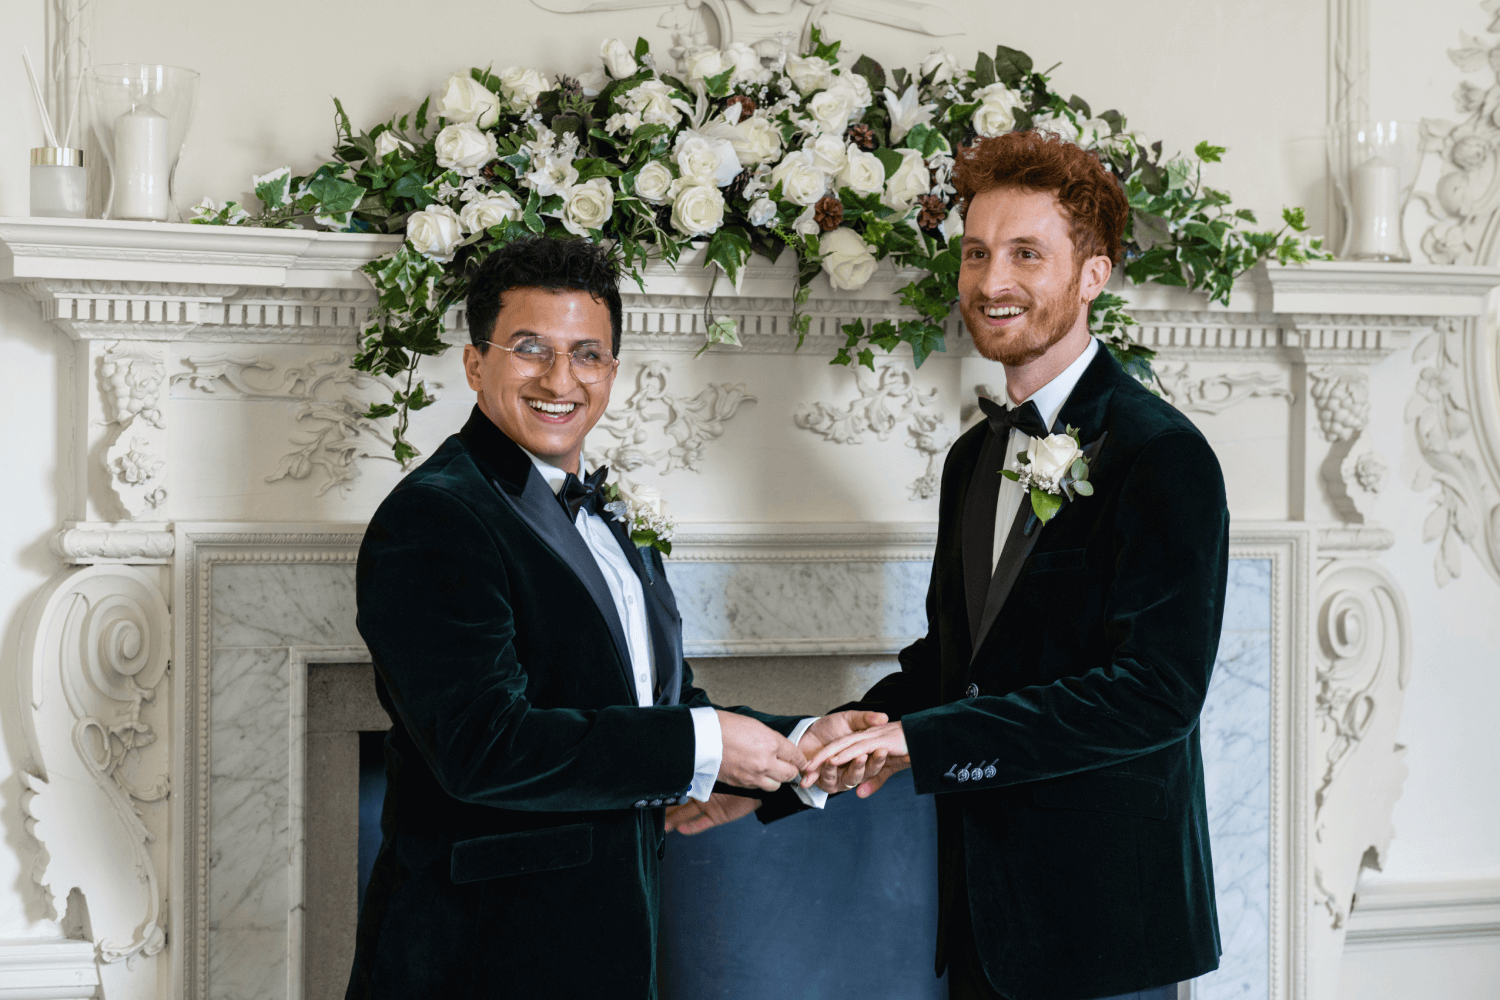 2 grooms smiling as one placing a wedding ring on the other during their gay marriage ceremony.